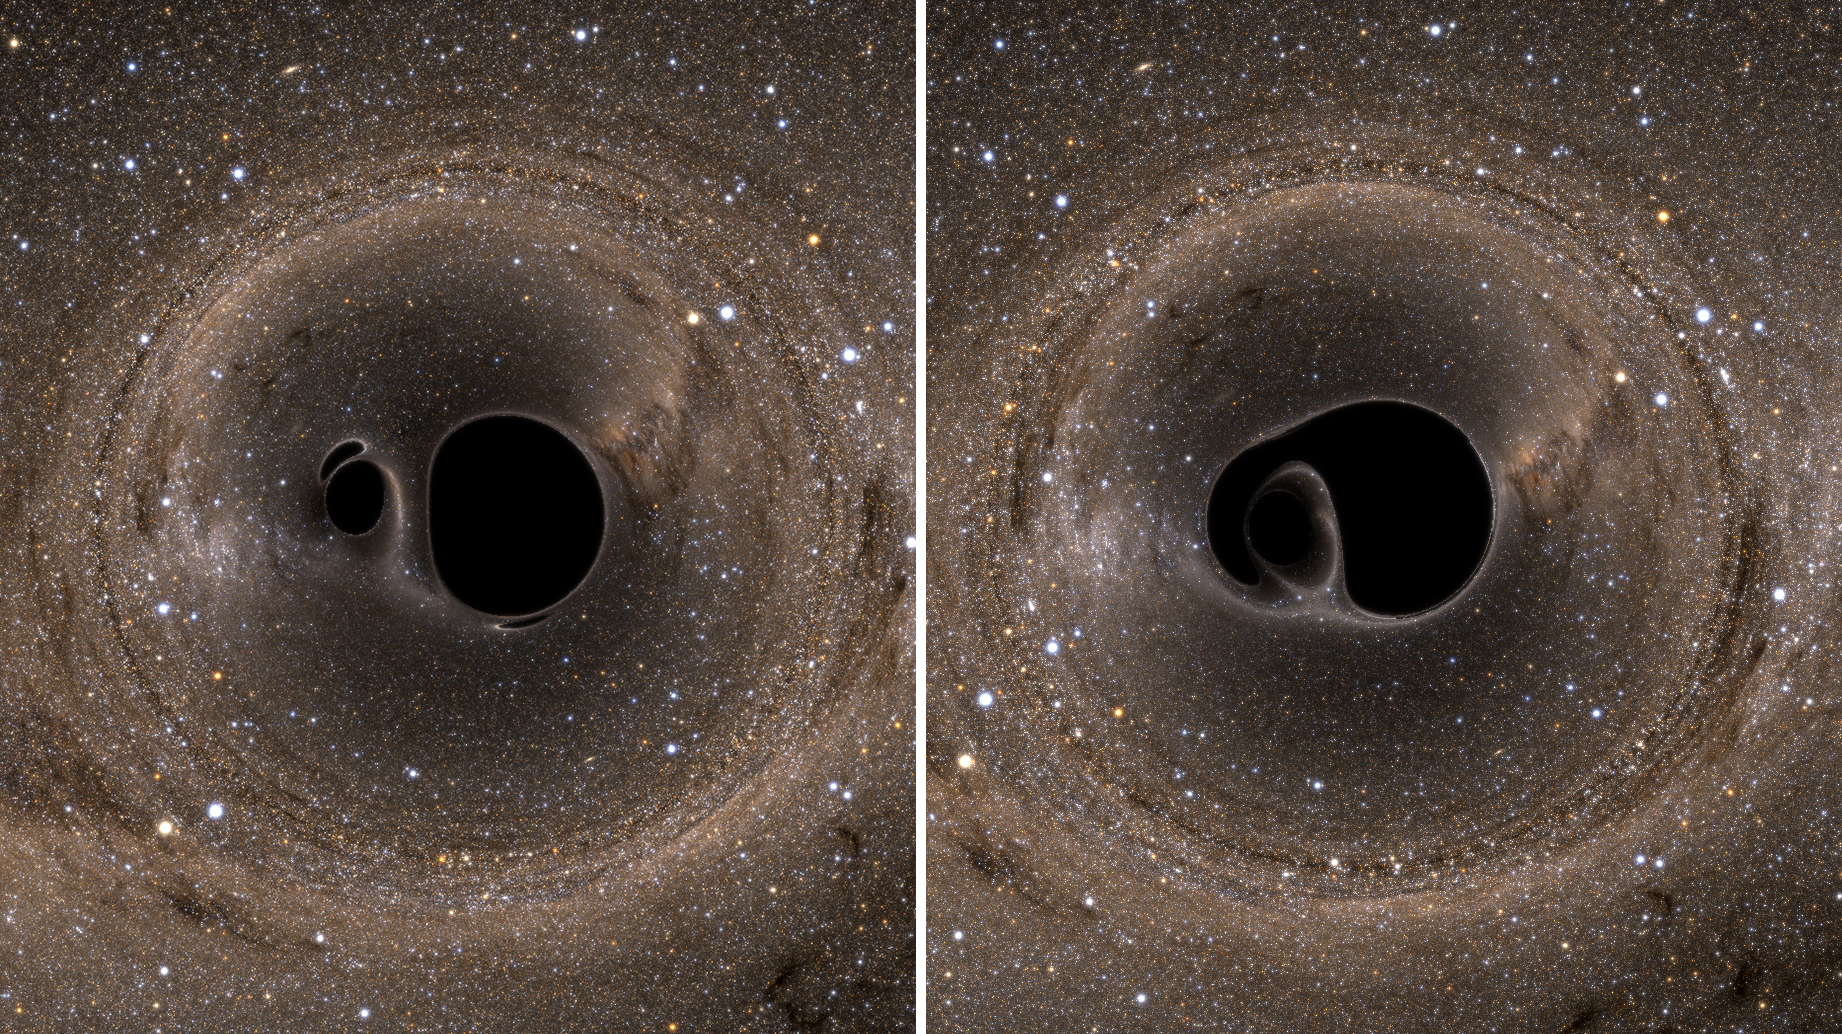 Computer renderings show two black holes about to merge as they spiral toward each other. The pair are shown from above (left) and from the side. To view a ‘top view’ video, click here. For a ‘side view’ video, click here. Images courtesy of the Simulating eXtreme Spacetimes Collaboration